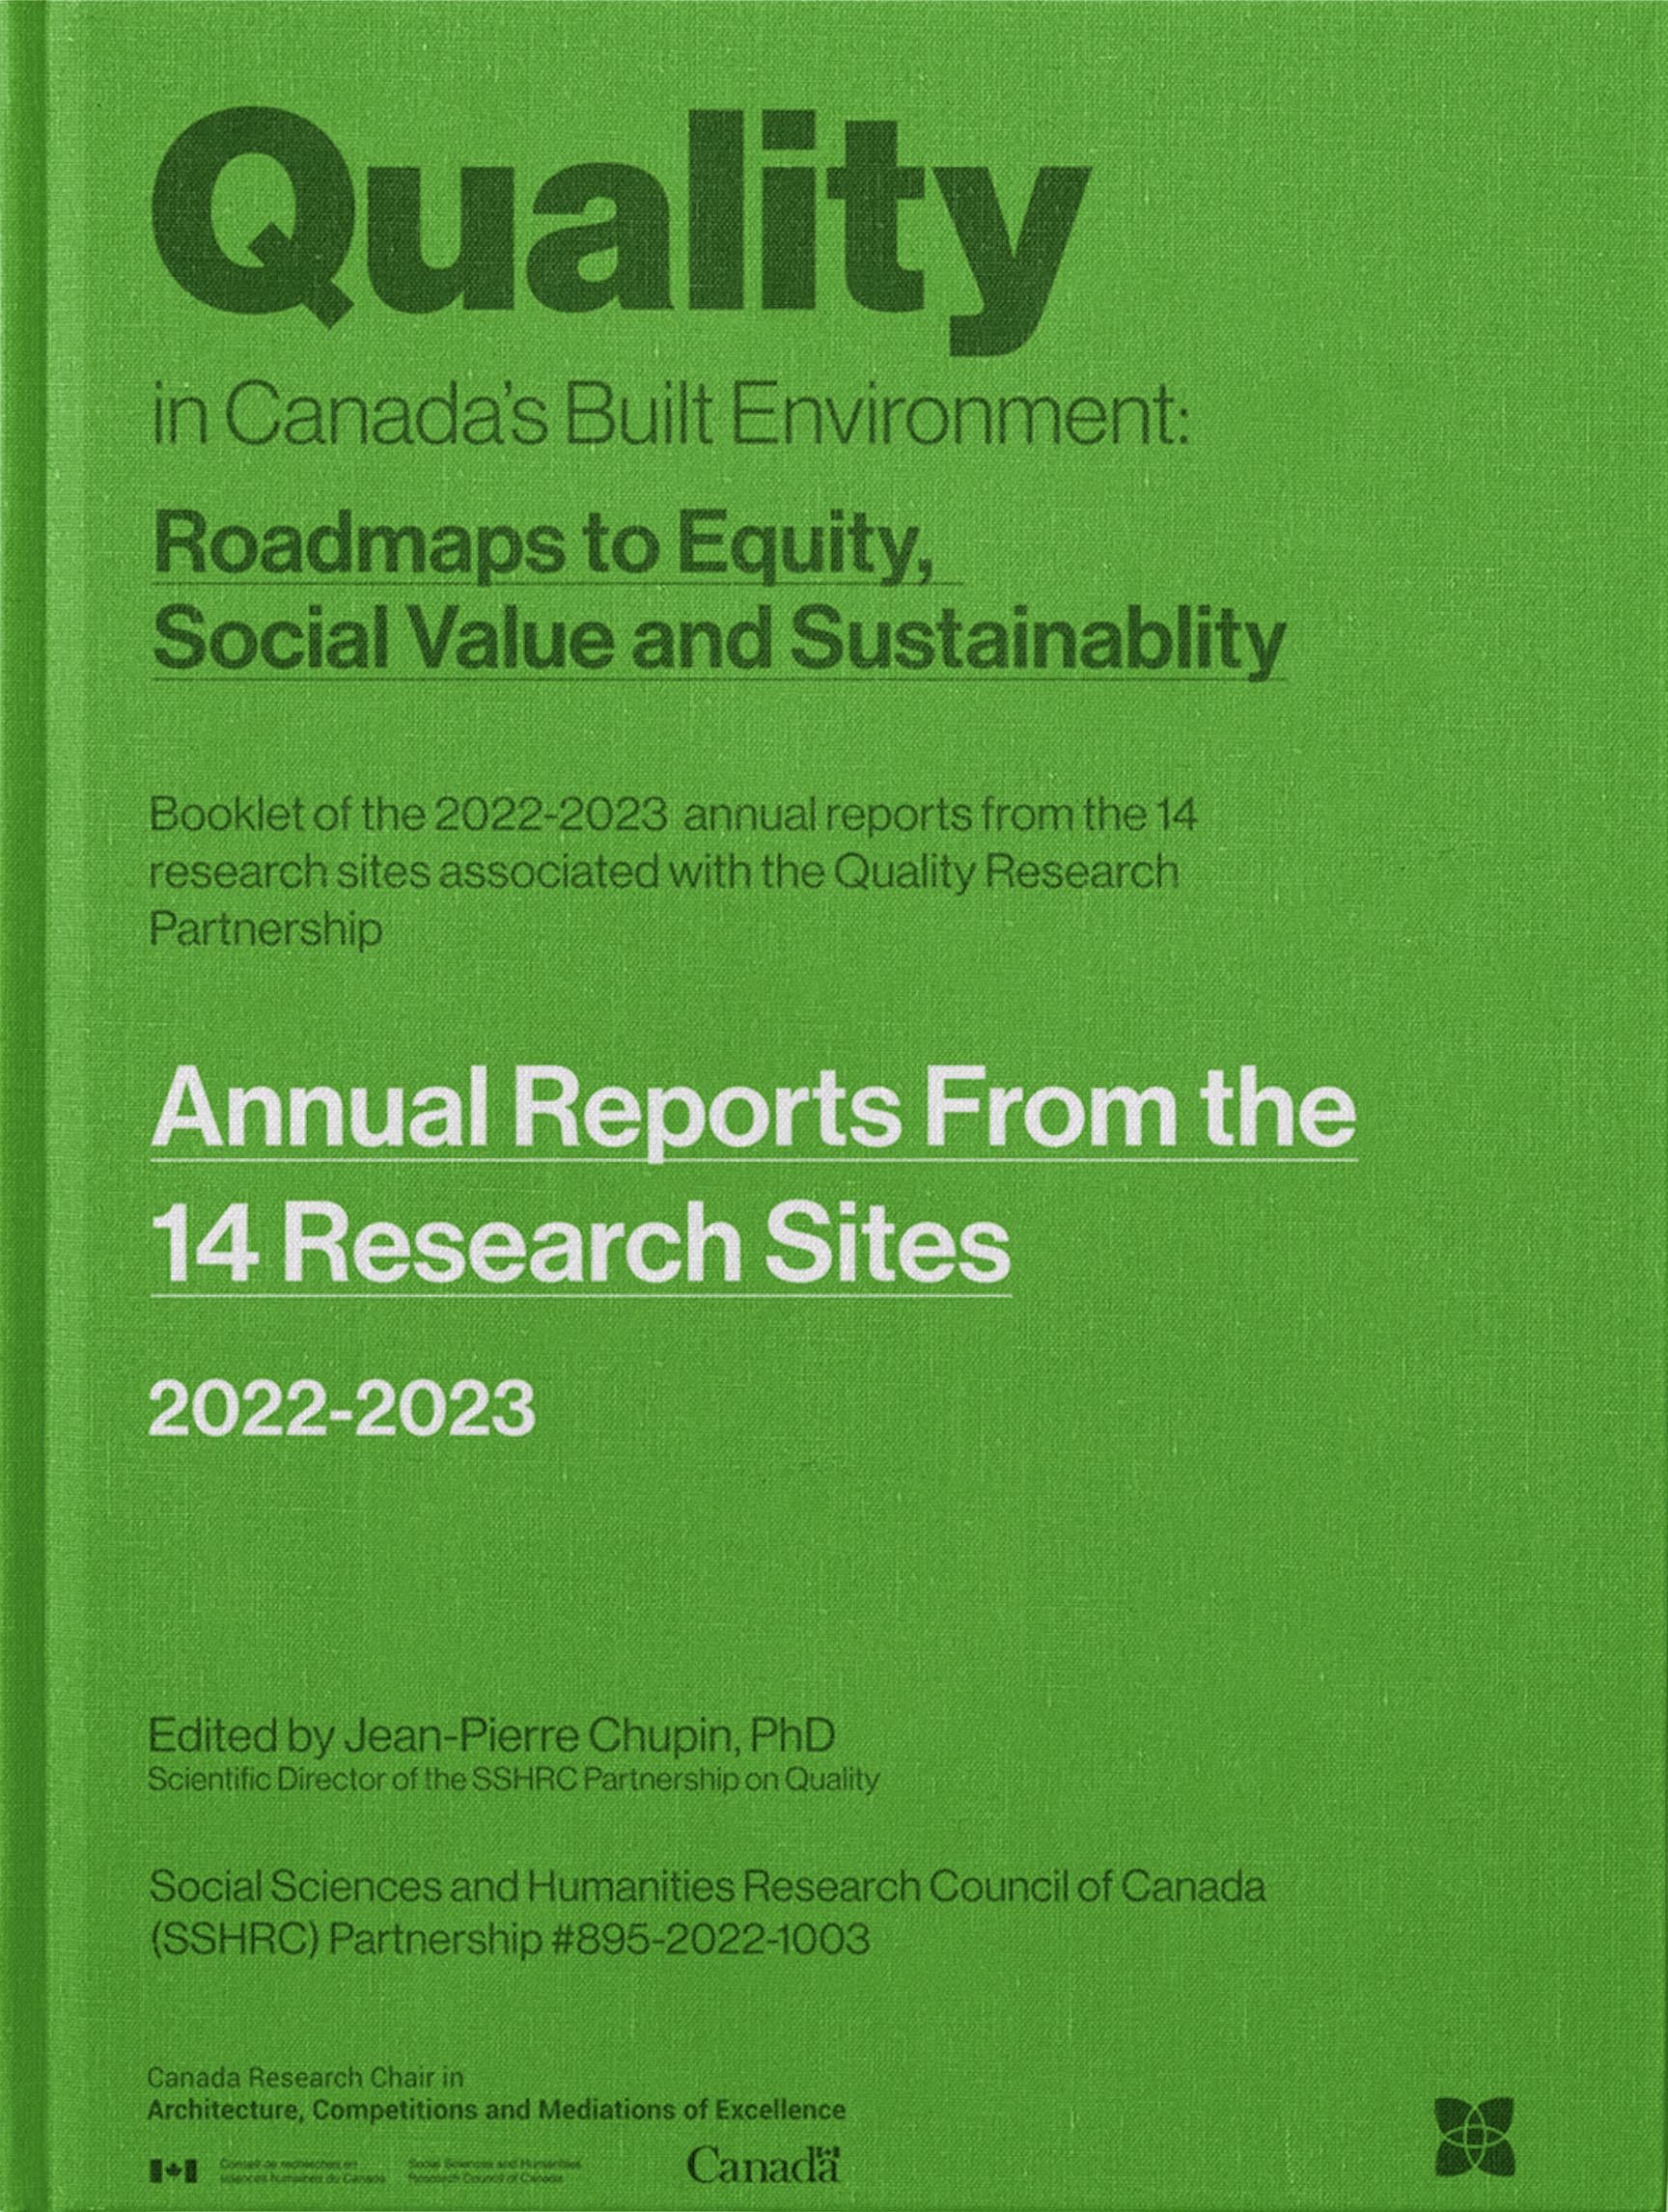 Annual Reports from the 14 Research Sites. 2022-2023. SSRHC Research Partnership (#895-2022-1003). Edited by Jean-Pierre Chupin, 2023, Université de Montréal. 75 pages